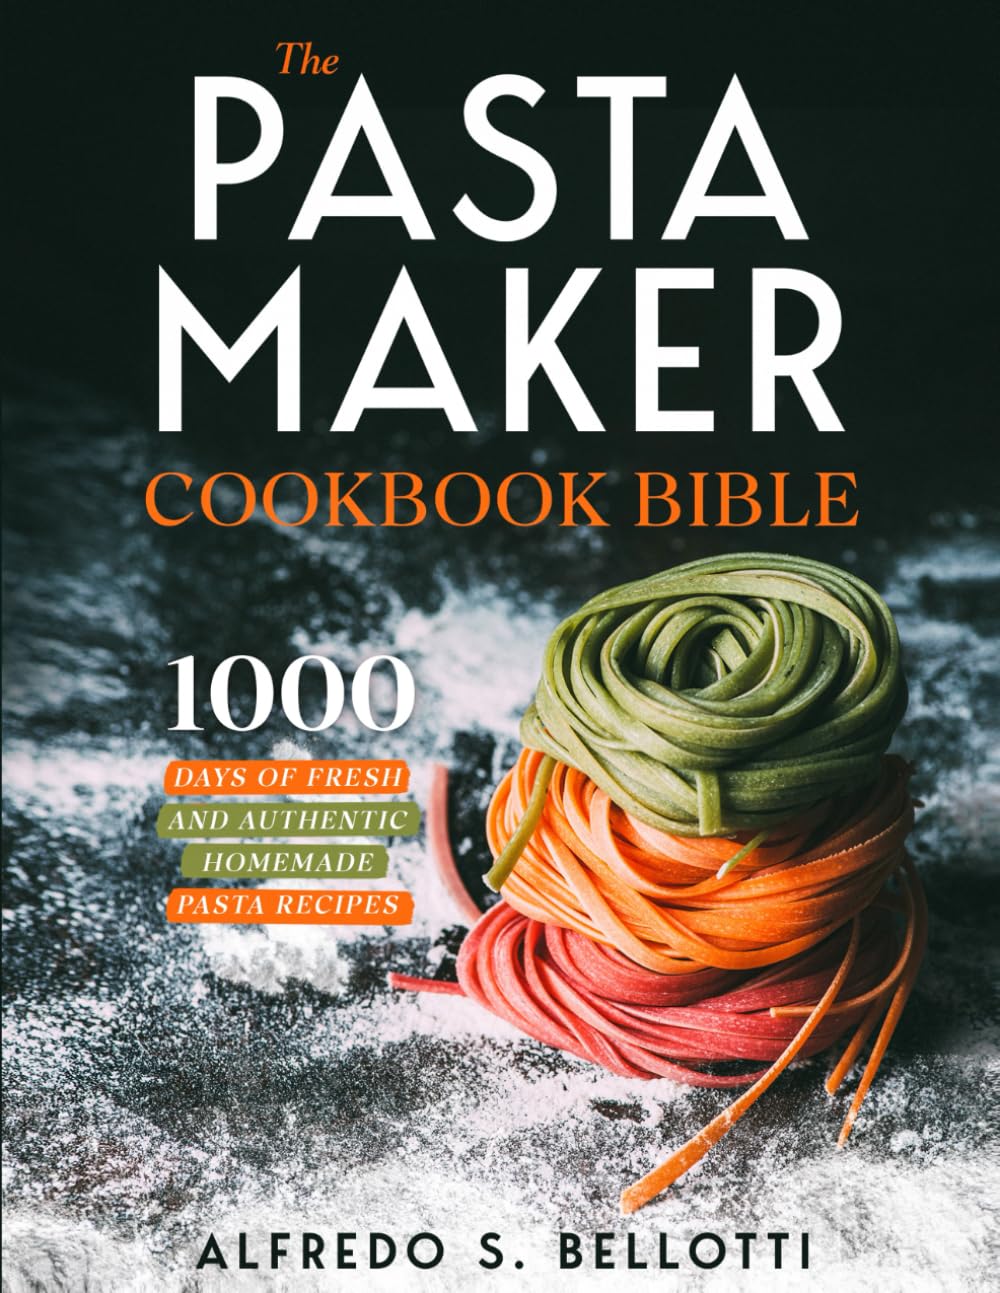 The Pasta Maker Cookbook Bible: 1000 Days of Step-by-Step Fresh and Authentic Homemade Pasta Recipes Paperback – September 22, 2023